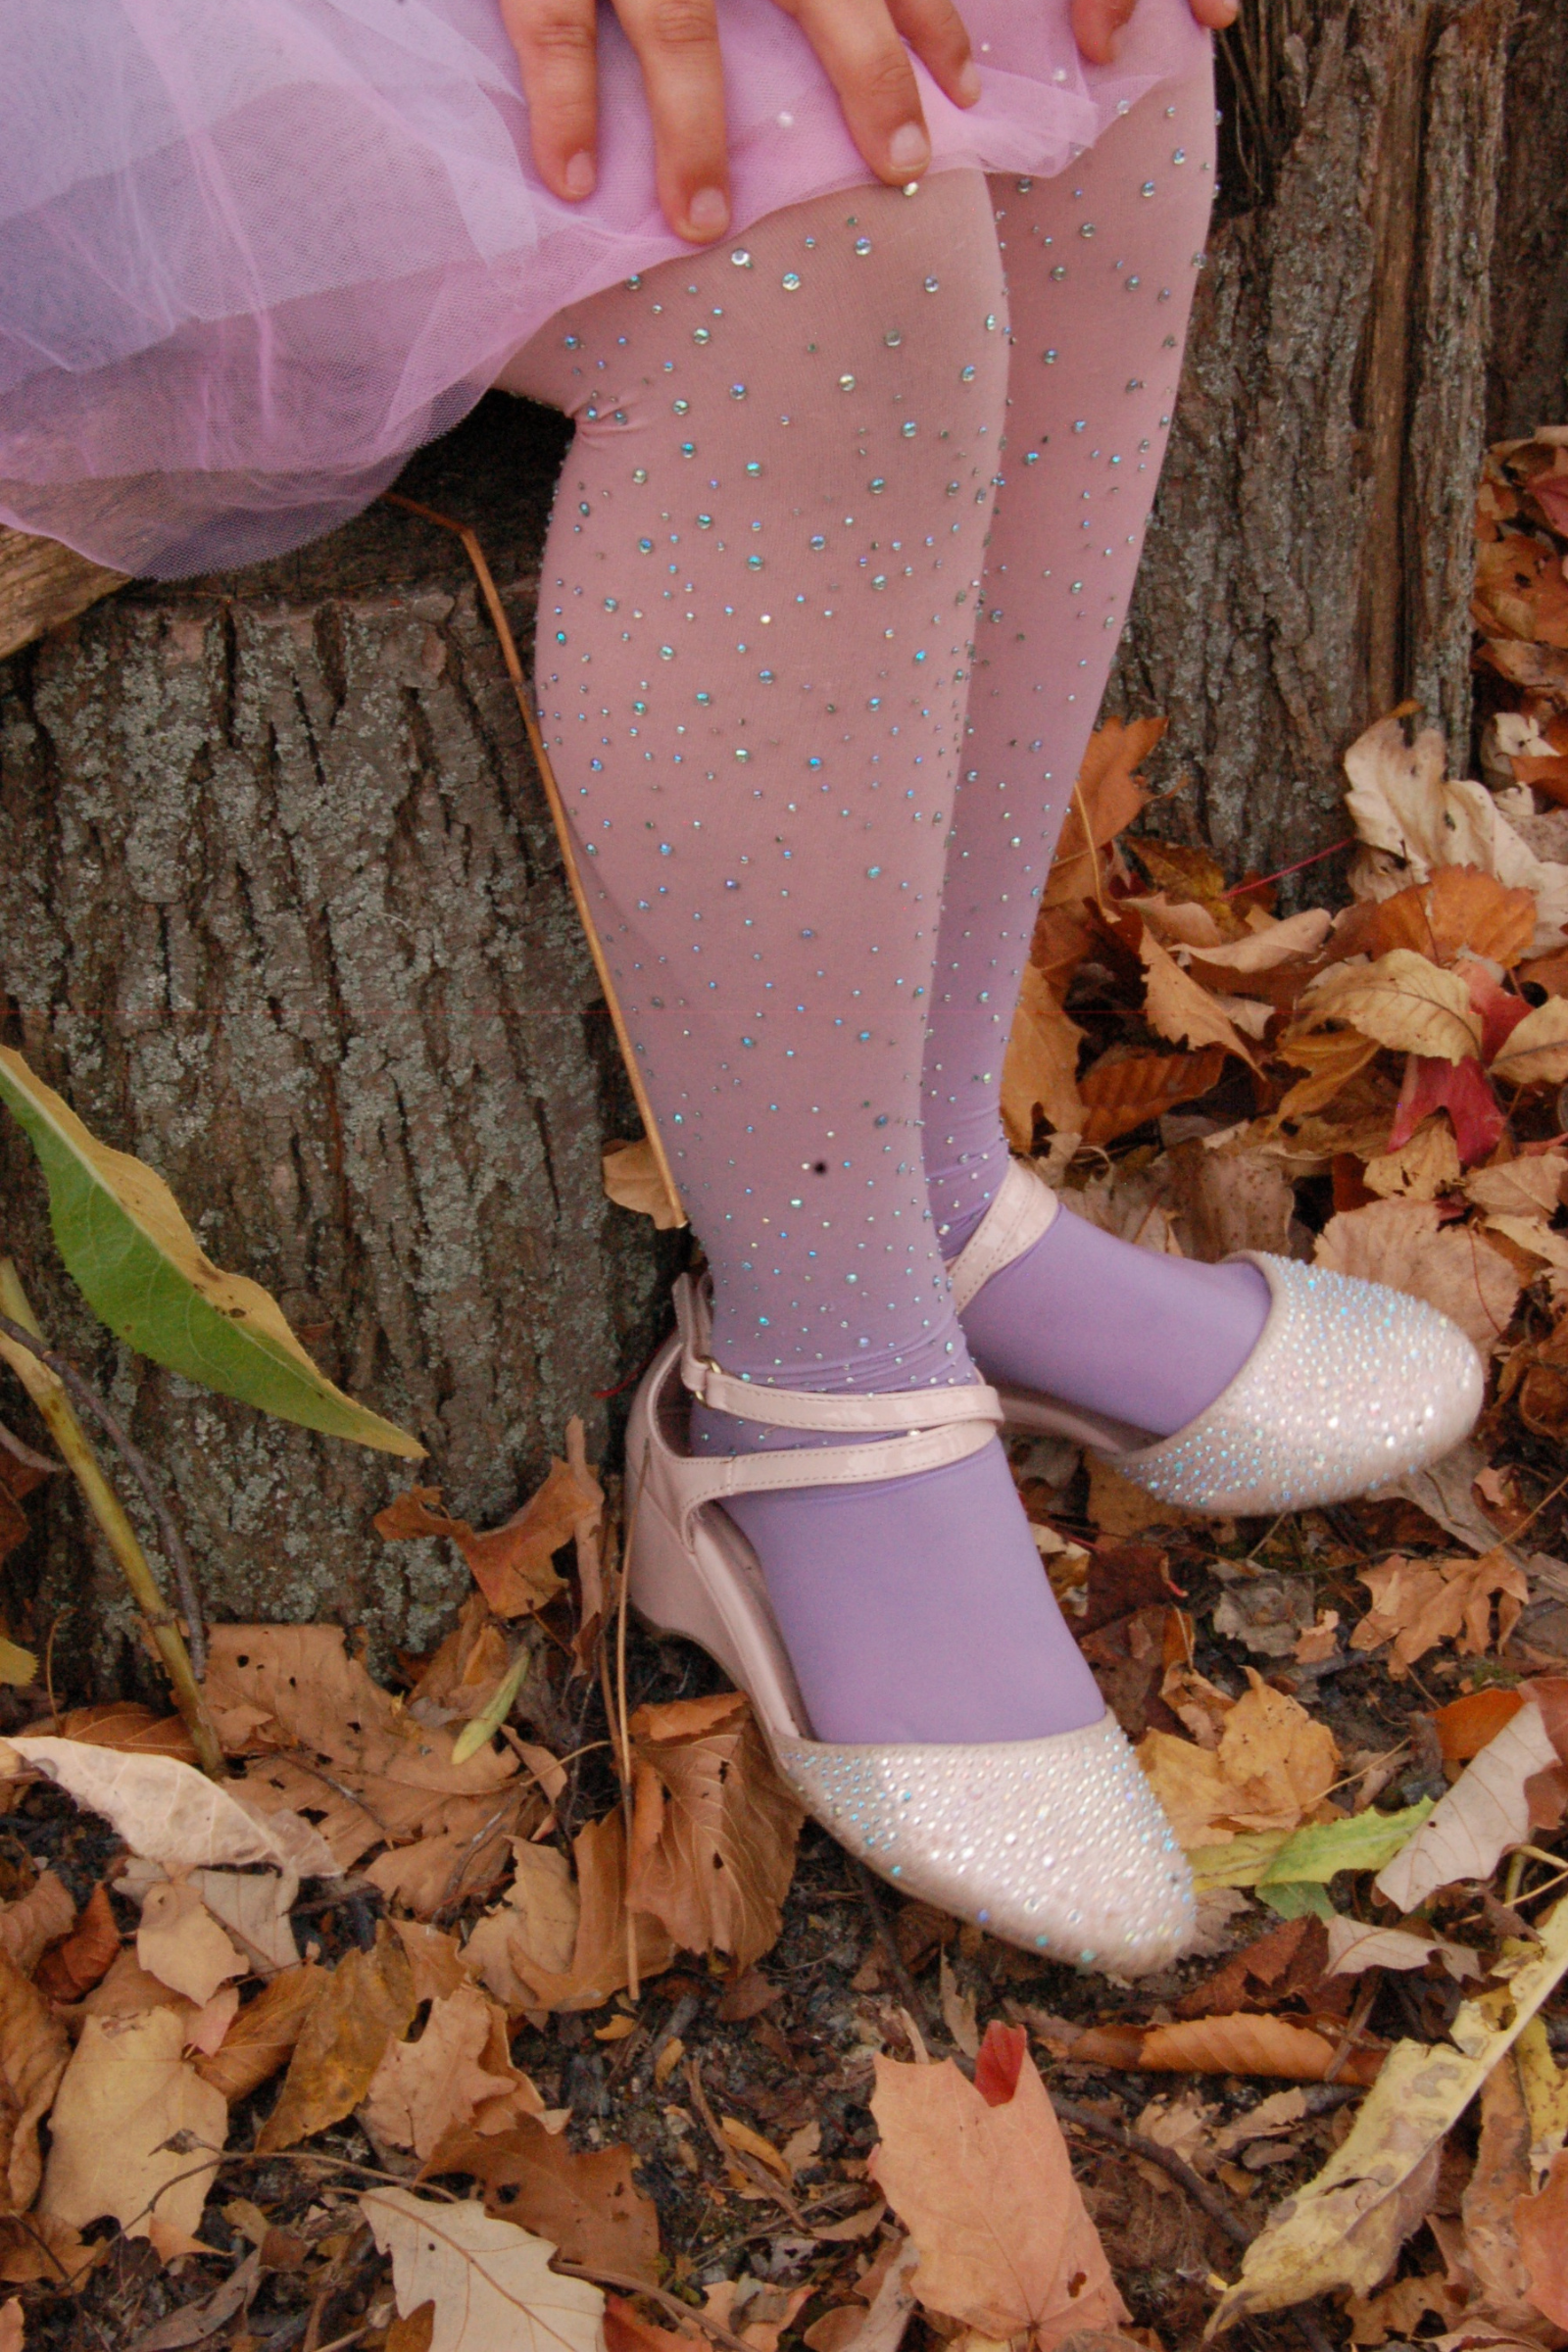 Fashion Do or Don't: Sparkly Tights, Itty Bitty Skirt